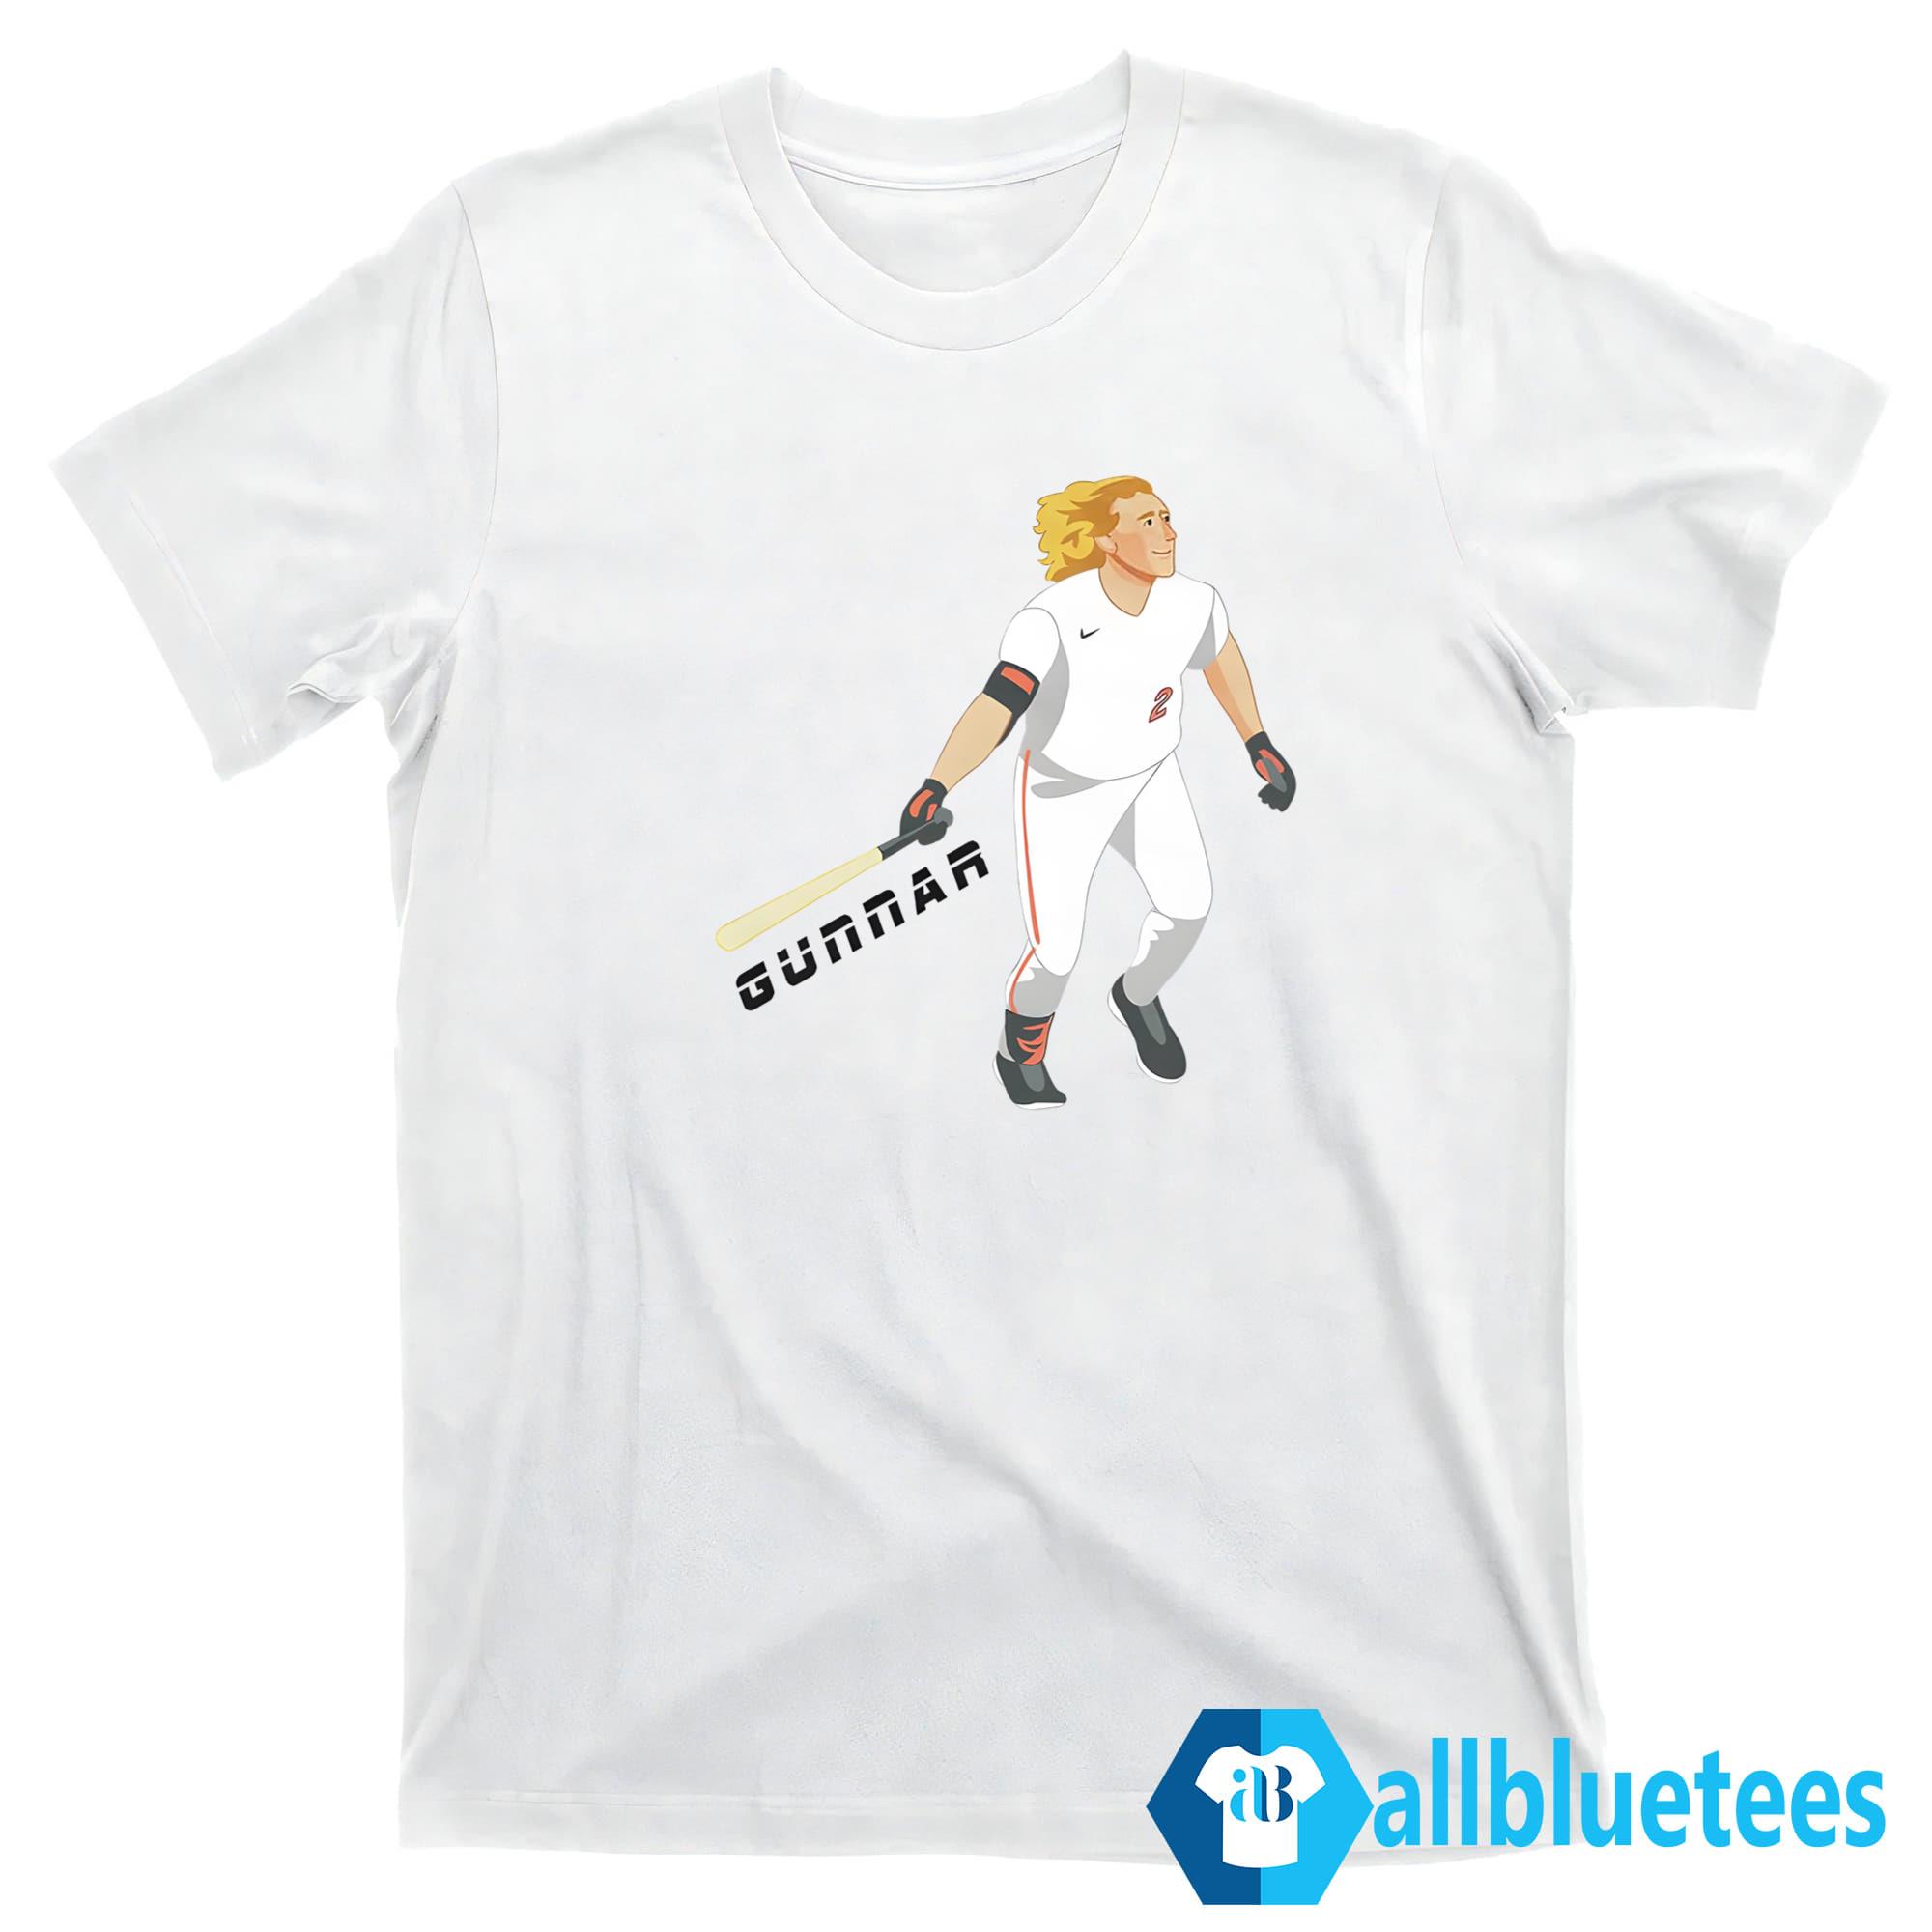 Baltimore Orioles '54 T-Shirt from Homage. | Ash | Vintage Apparel from Homage.